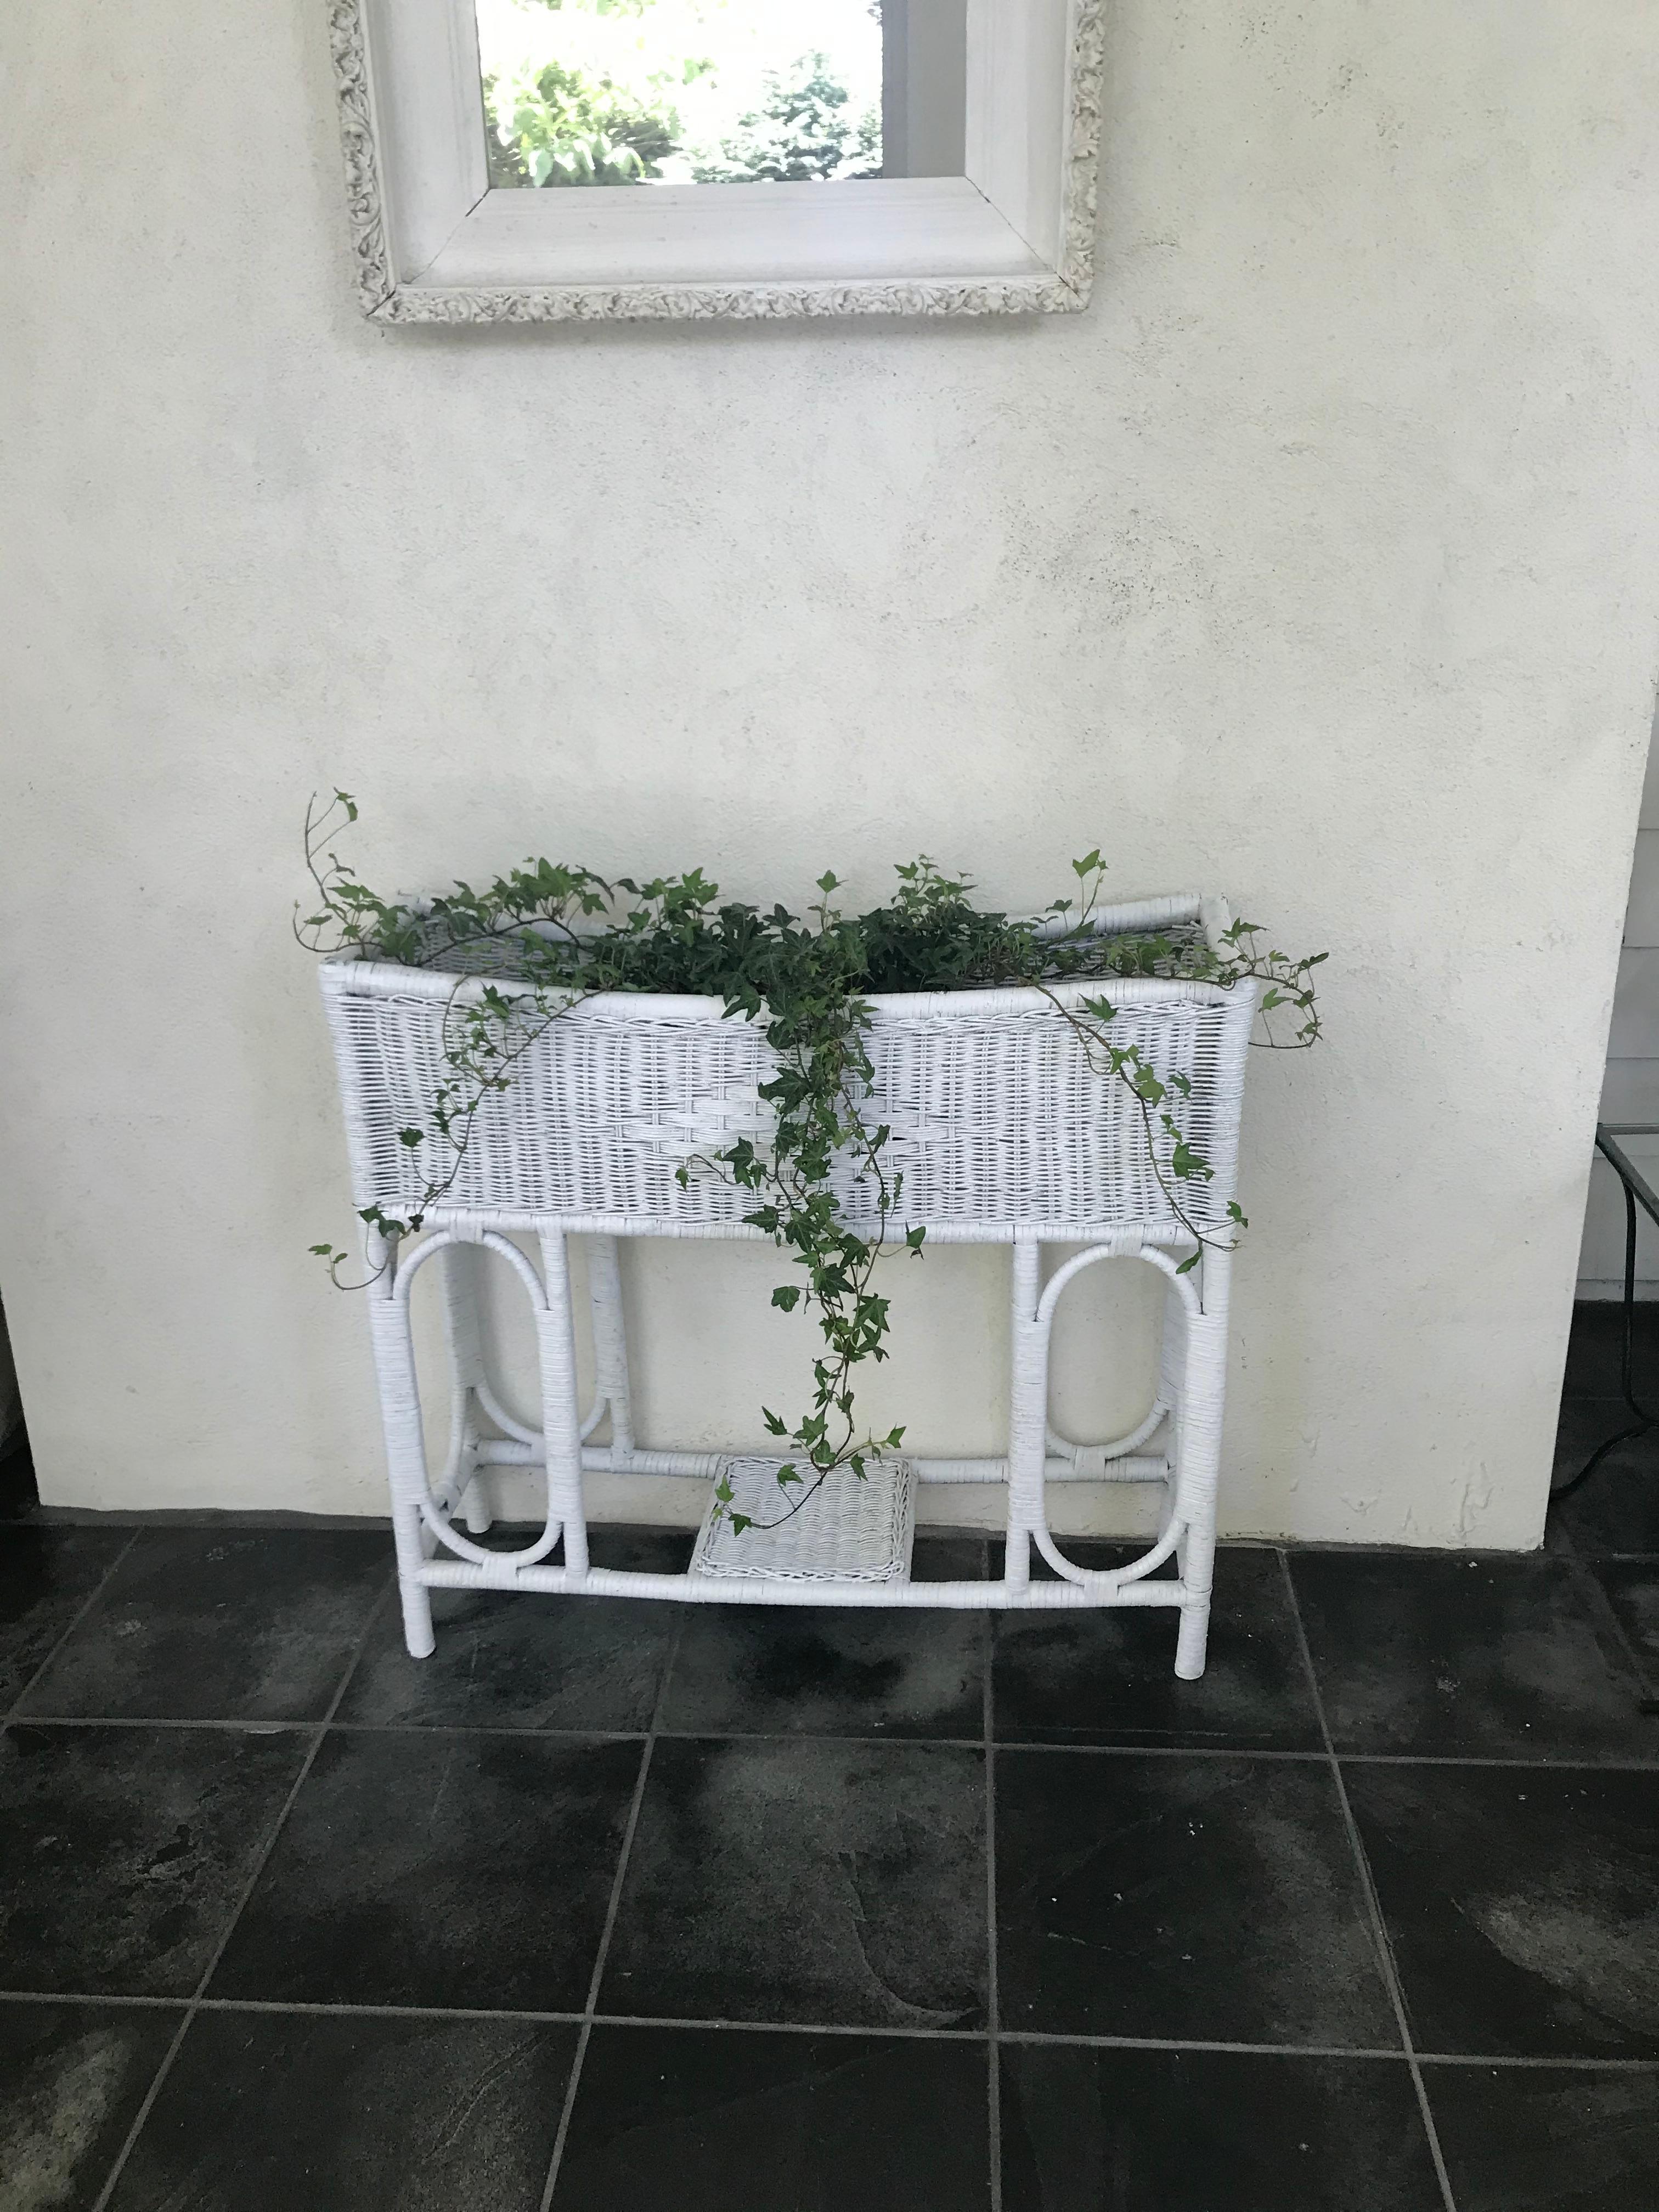 White wicker plant stand. Vintage painted wicker plant stand with upper box for potted flowers or ferns with central wicker stretcher panel below for an additional plant. American summer porch. United States, late 20th century.
Dimensions: 30.5